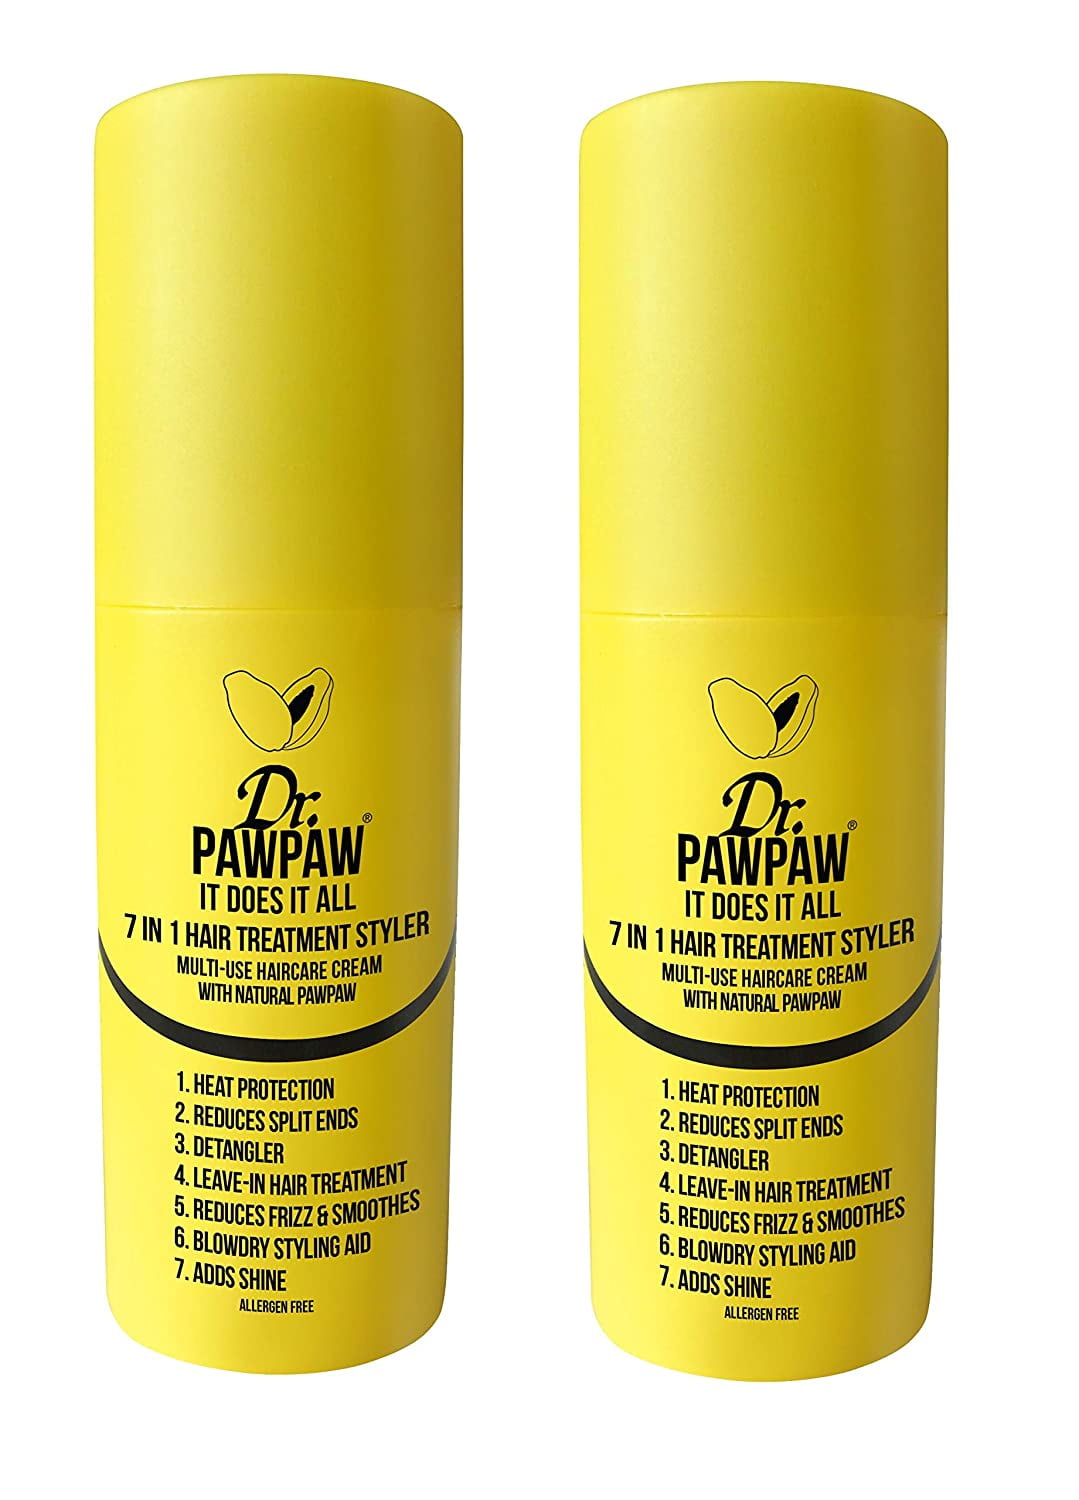 Dr. PAWPAW - It Does It All in 1 Hair Treatment Styler | Heat Protector | Leave-in Treatment | Reduces Frizz & Styling (150 ml) (2 Pack) - Walmart.com